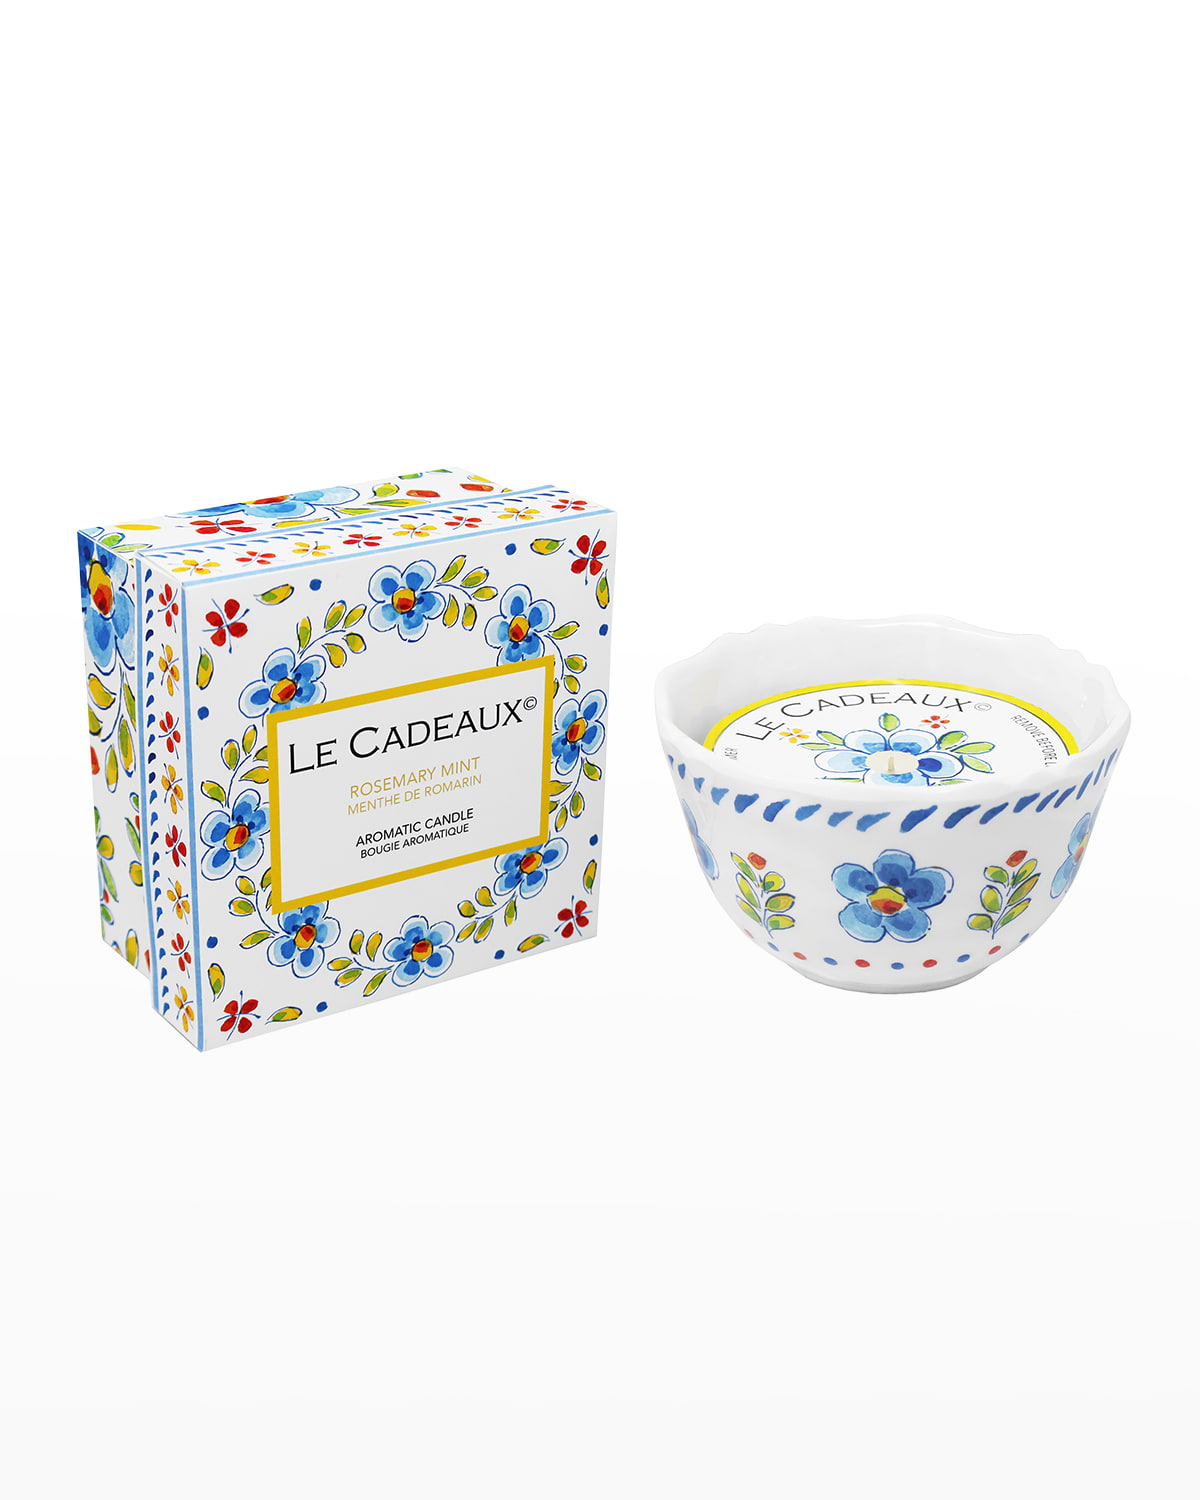 Le Cadeaux Candle In Gift Box In Rosemary Mint